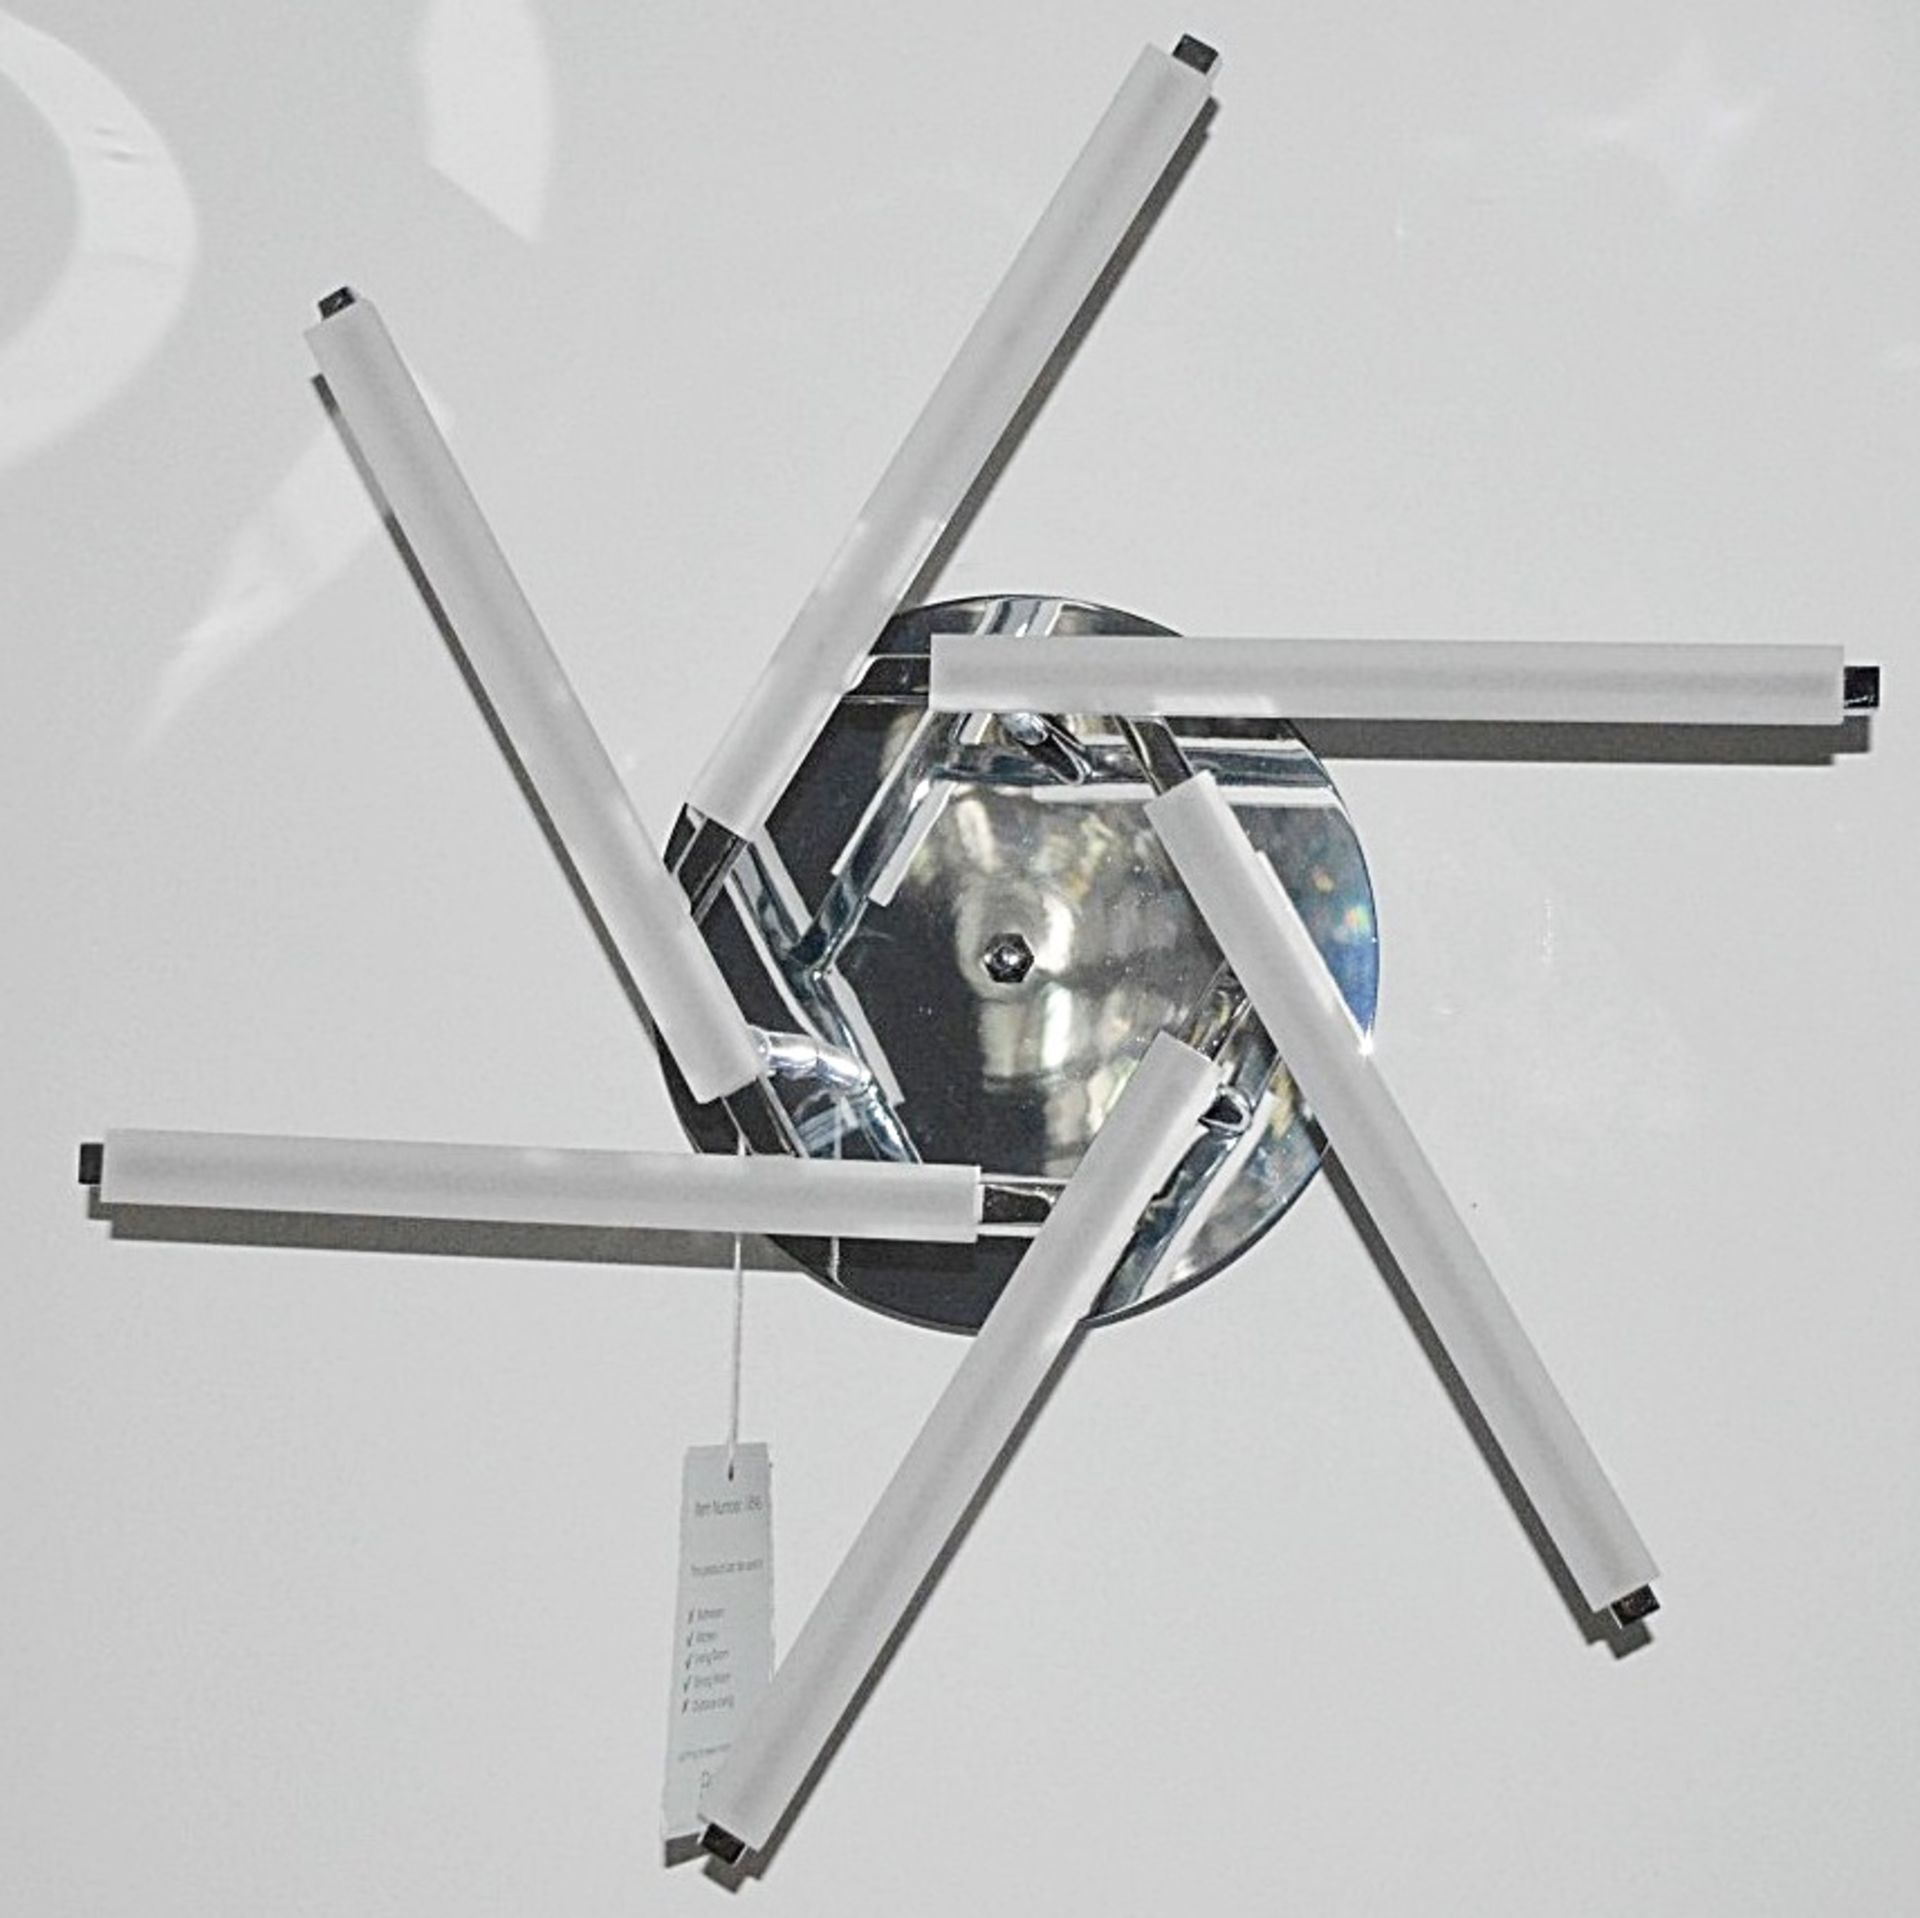 1 x Solexa 6 Light Led Chrome Ceiling Fitting With Frosted Criss Cross Pattern Arms - RRP £288.00 - Image 2 of 4